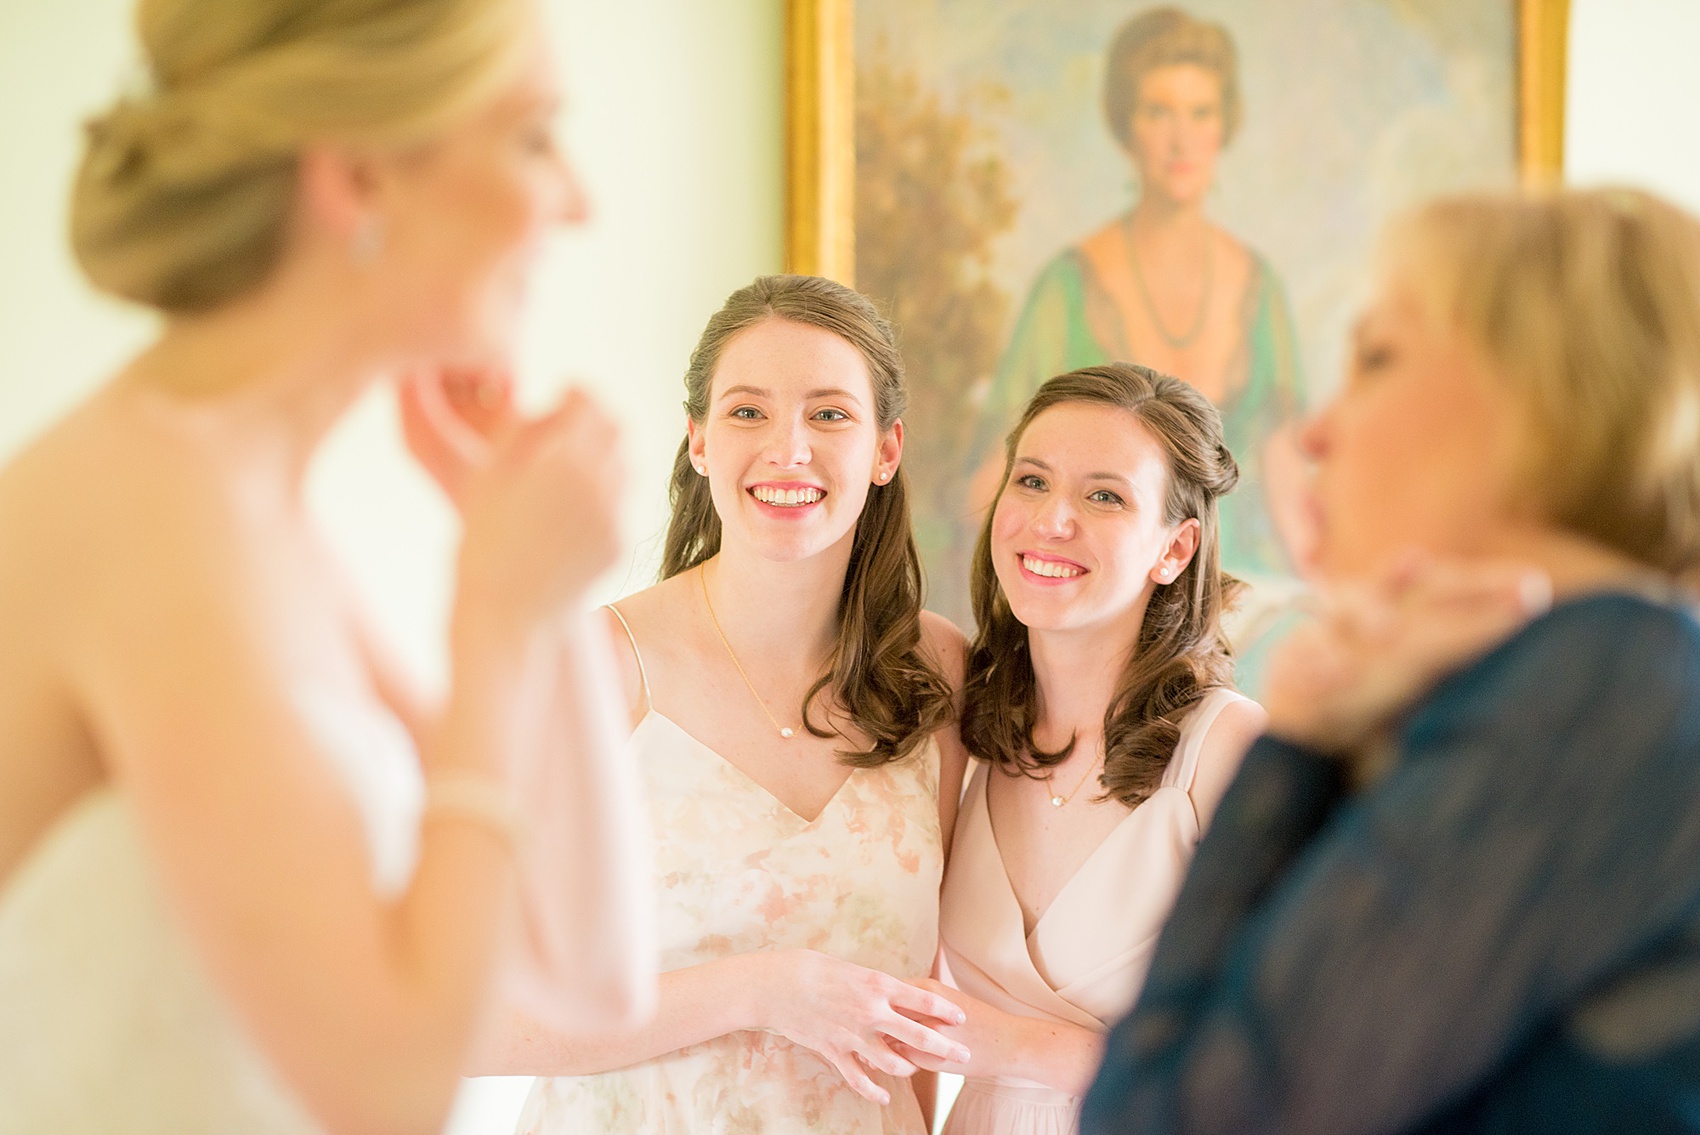 Waveny House wedding photos in Connecticut by Mikkel Paige Photography. Picture of the bride's sisters watching her get ready.